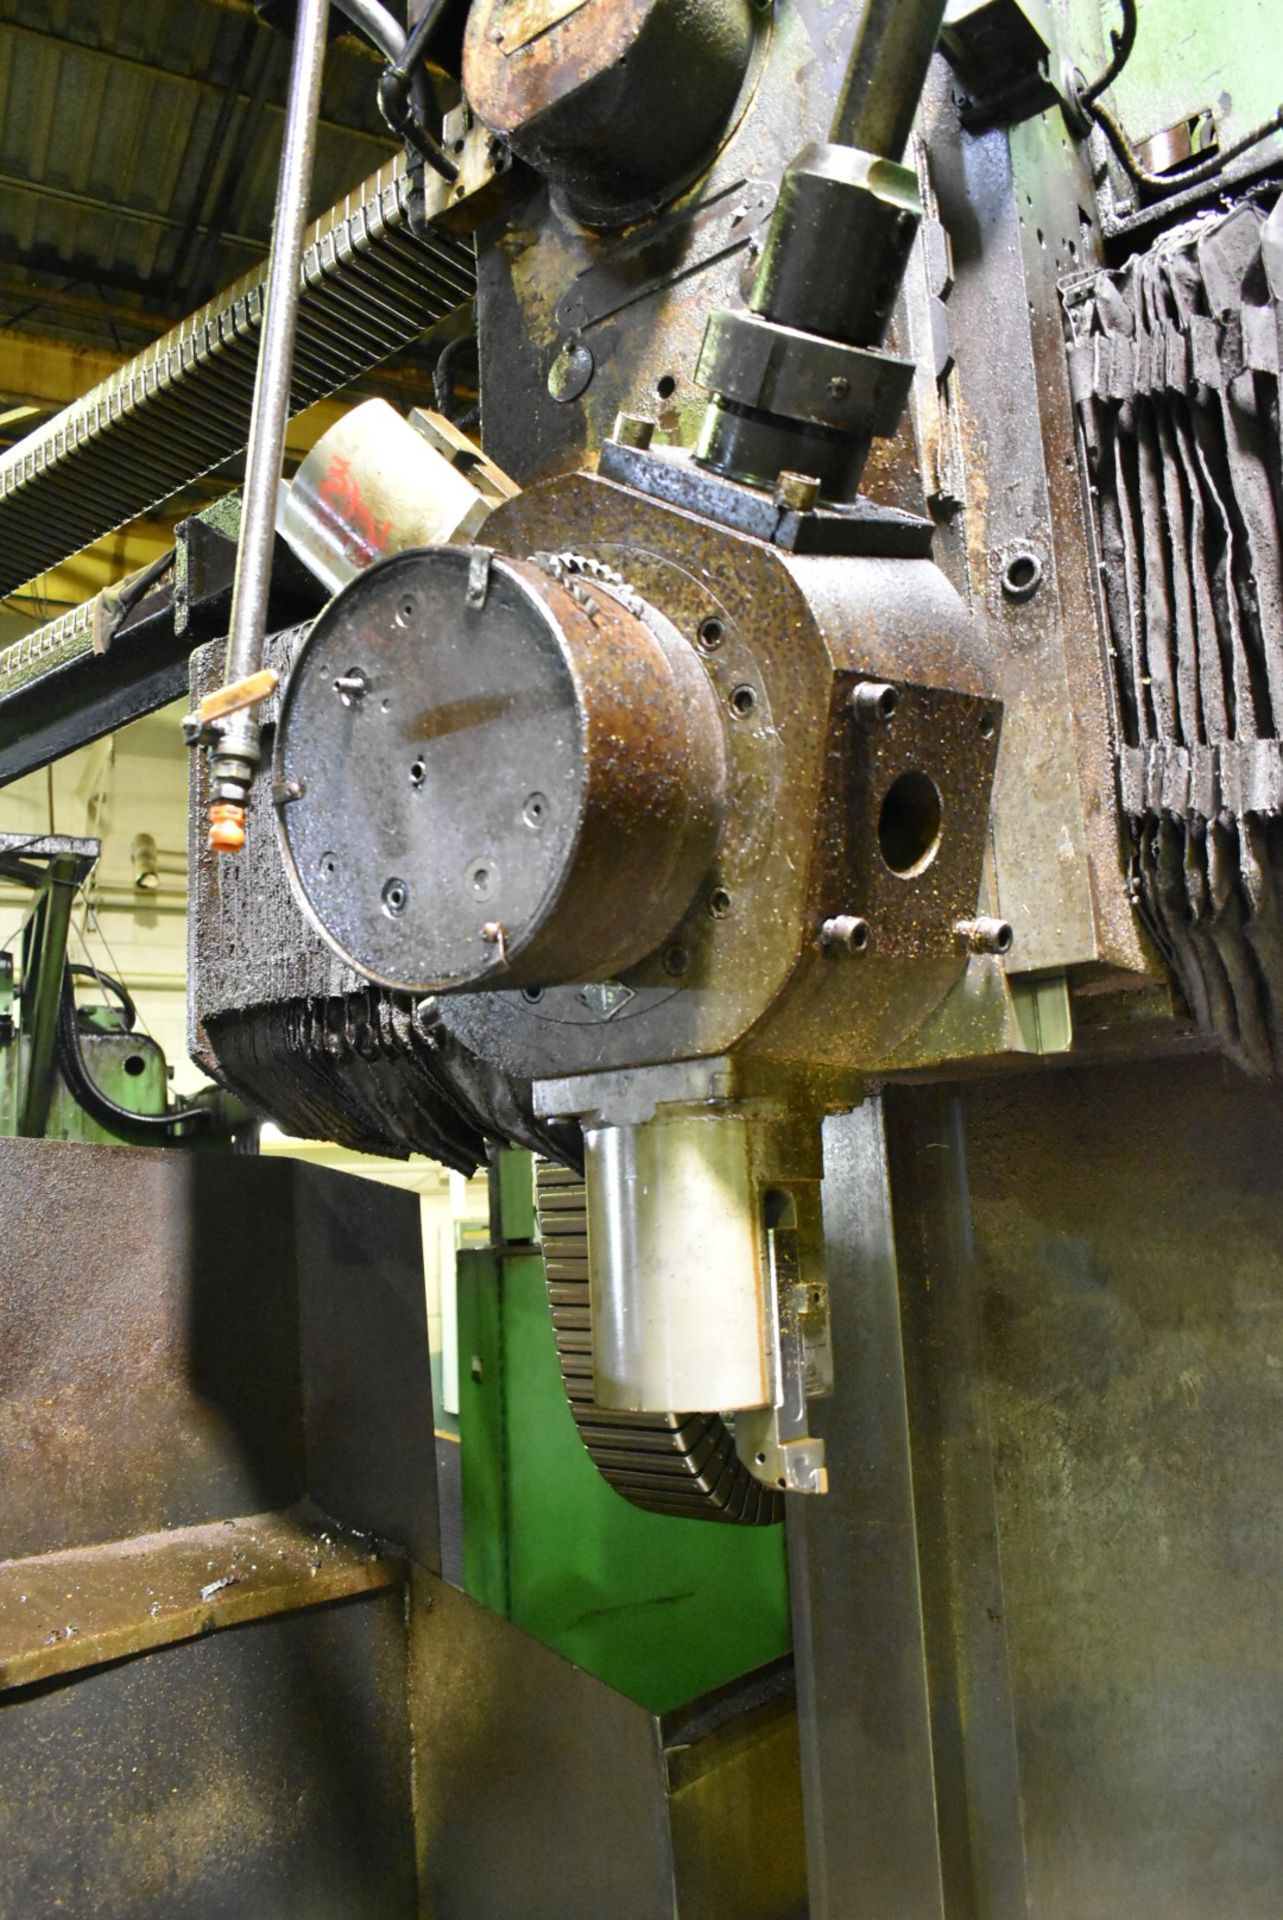 GIDDINGS & LEWIS 52" CNC VERTICAL TURRET LATHE WITH MITSUBISHI CNC CONTROL, 64" SWING, 42" MAX. - Image 4 of 7